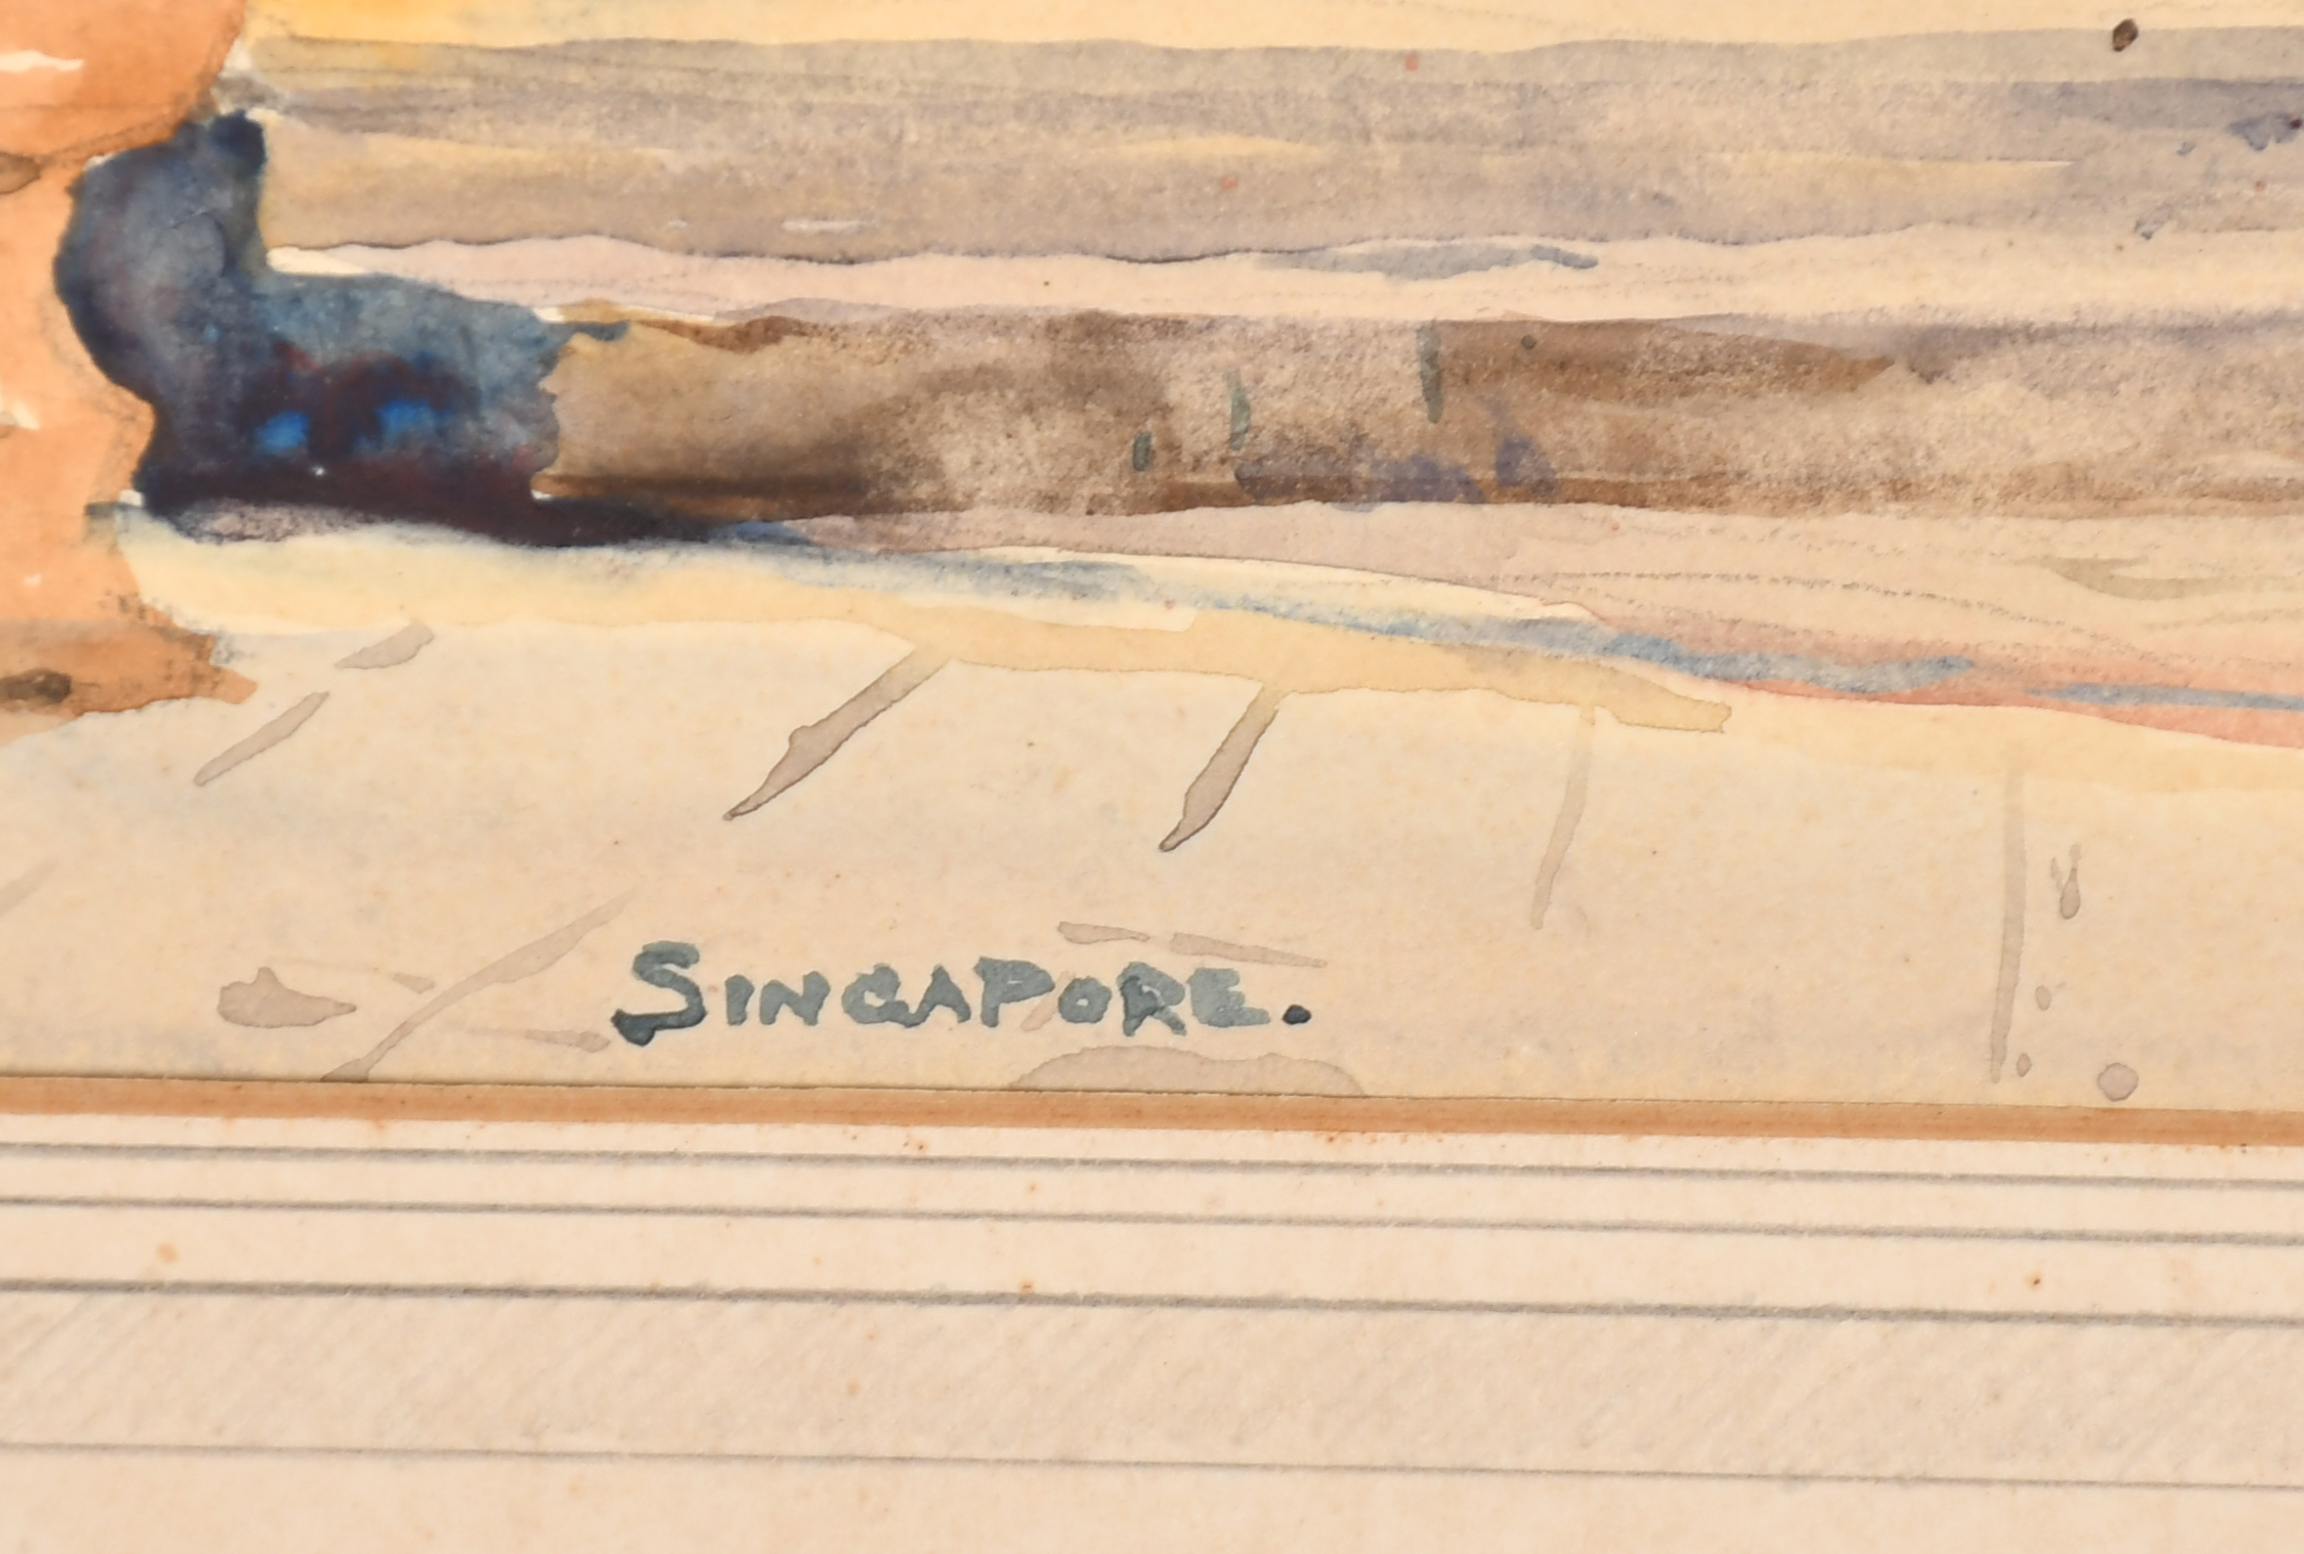 M E Julius (20th Century) British. "Singapore", Watercolour, Signed and inscribed, Mounted, unframed - Image 4 of 5